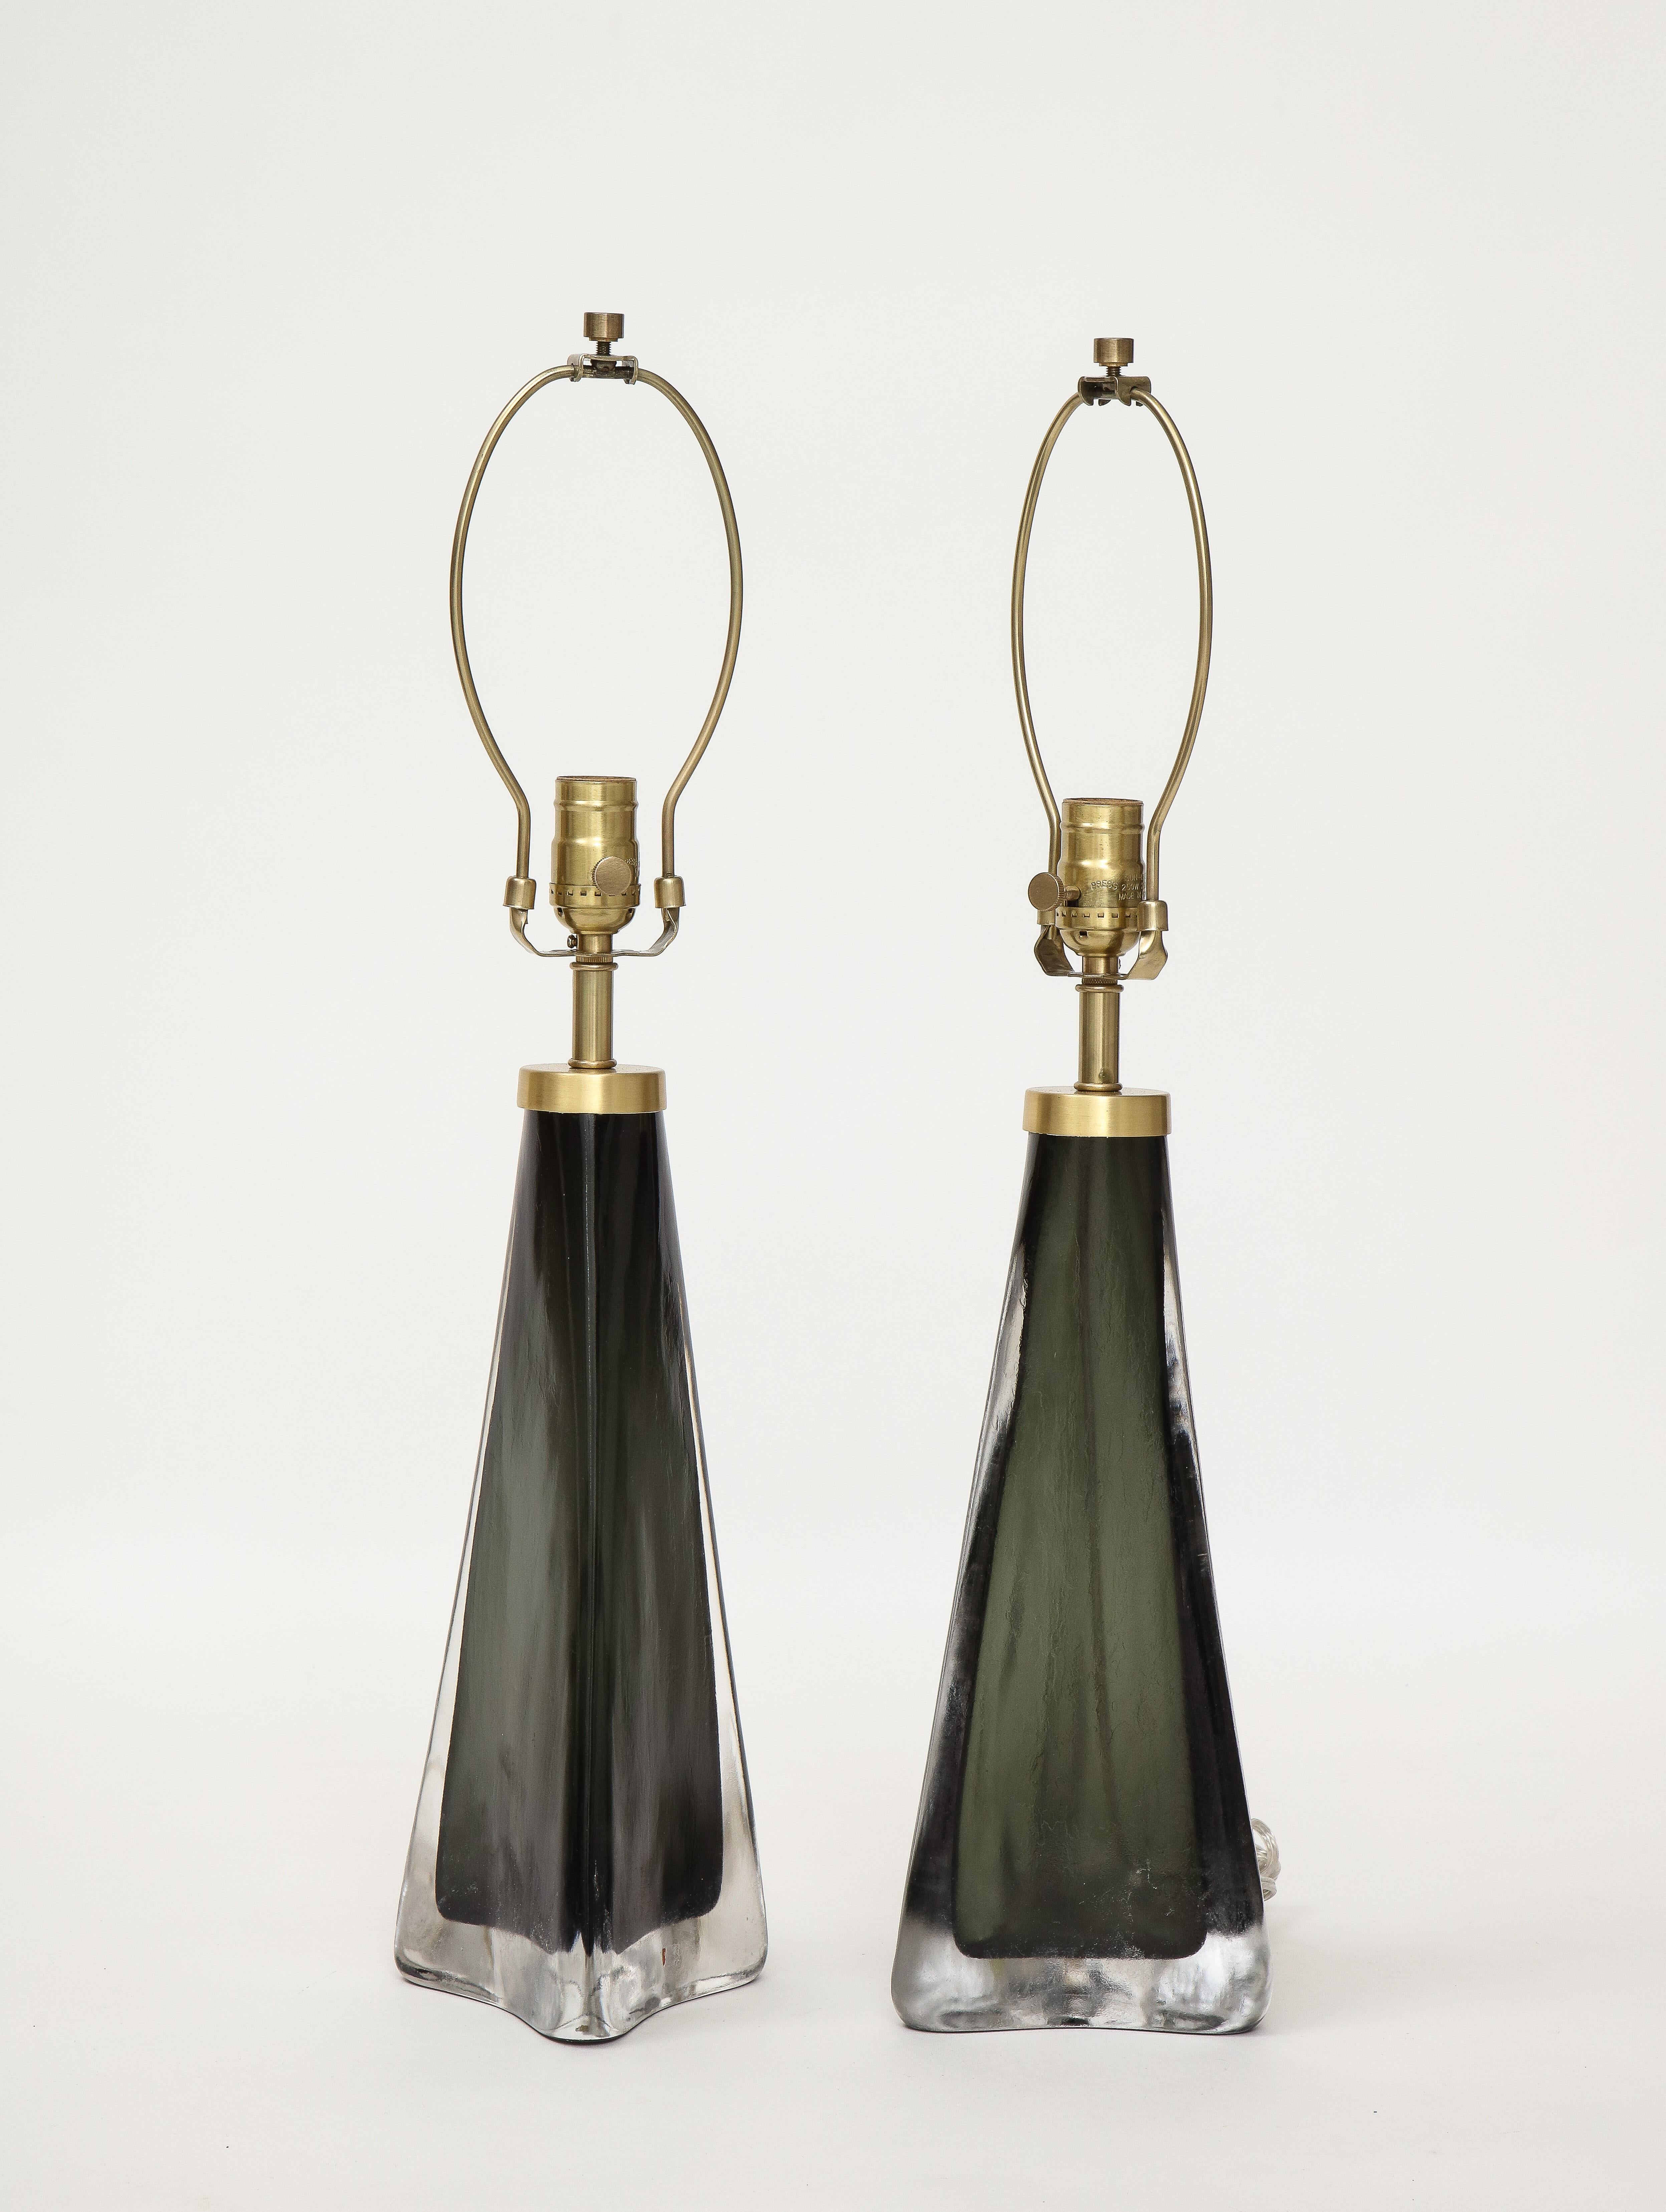 Pair of mossy green/grey triangular form scavo/frosted crystal lamps featuring brushed brass hardware. Lamps have been rewired for use in the USA. 100W max bulbs.